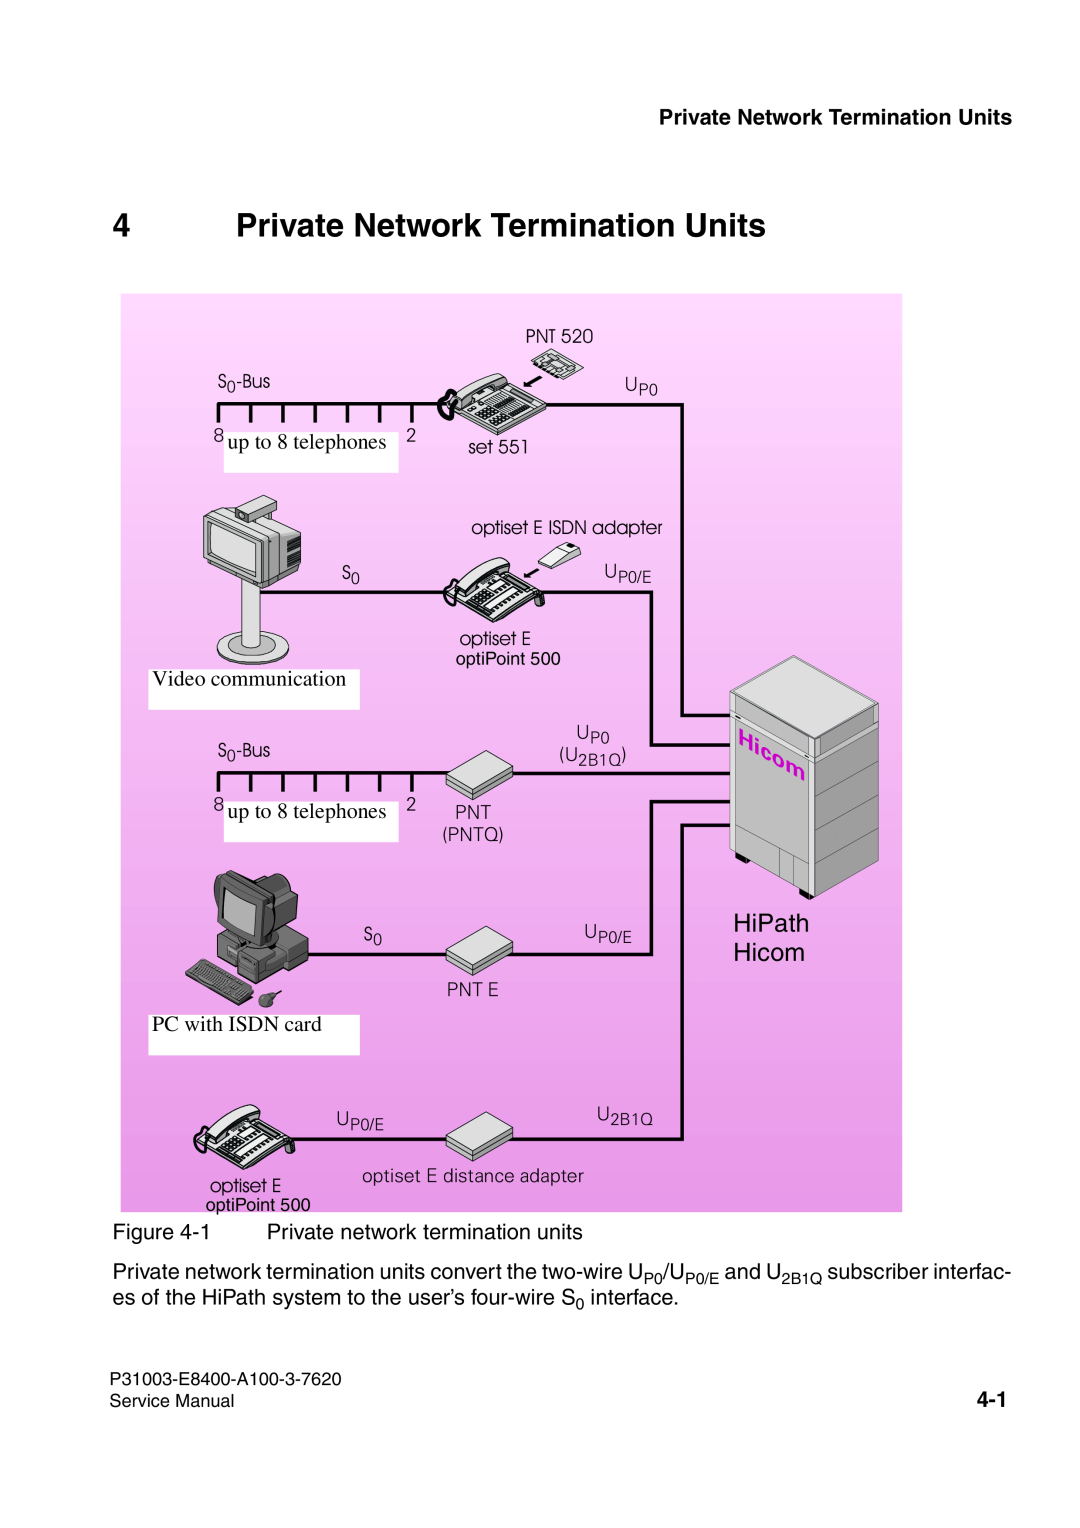 Siemens 500 service manual Private Network Termination Units, HiPath, Hicom, up to 8 telephones 